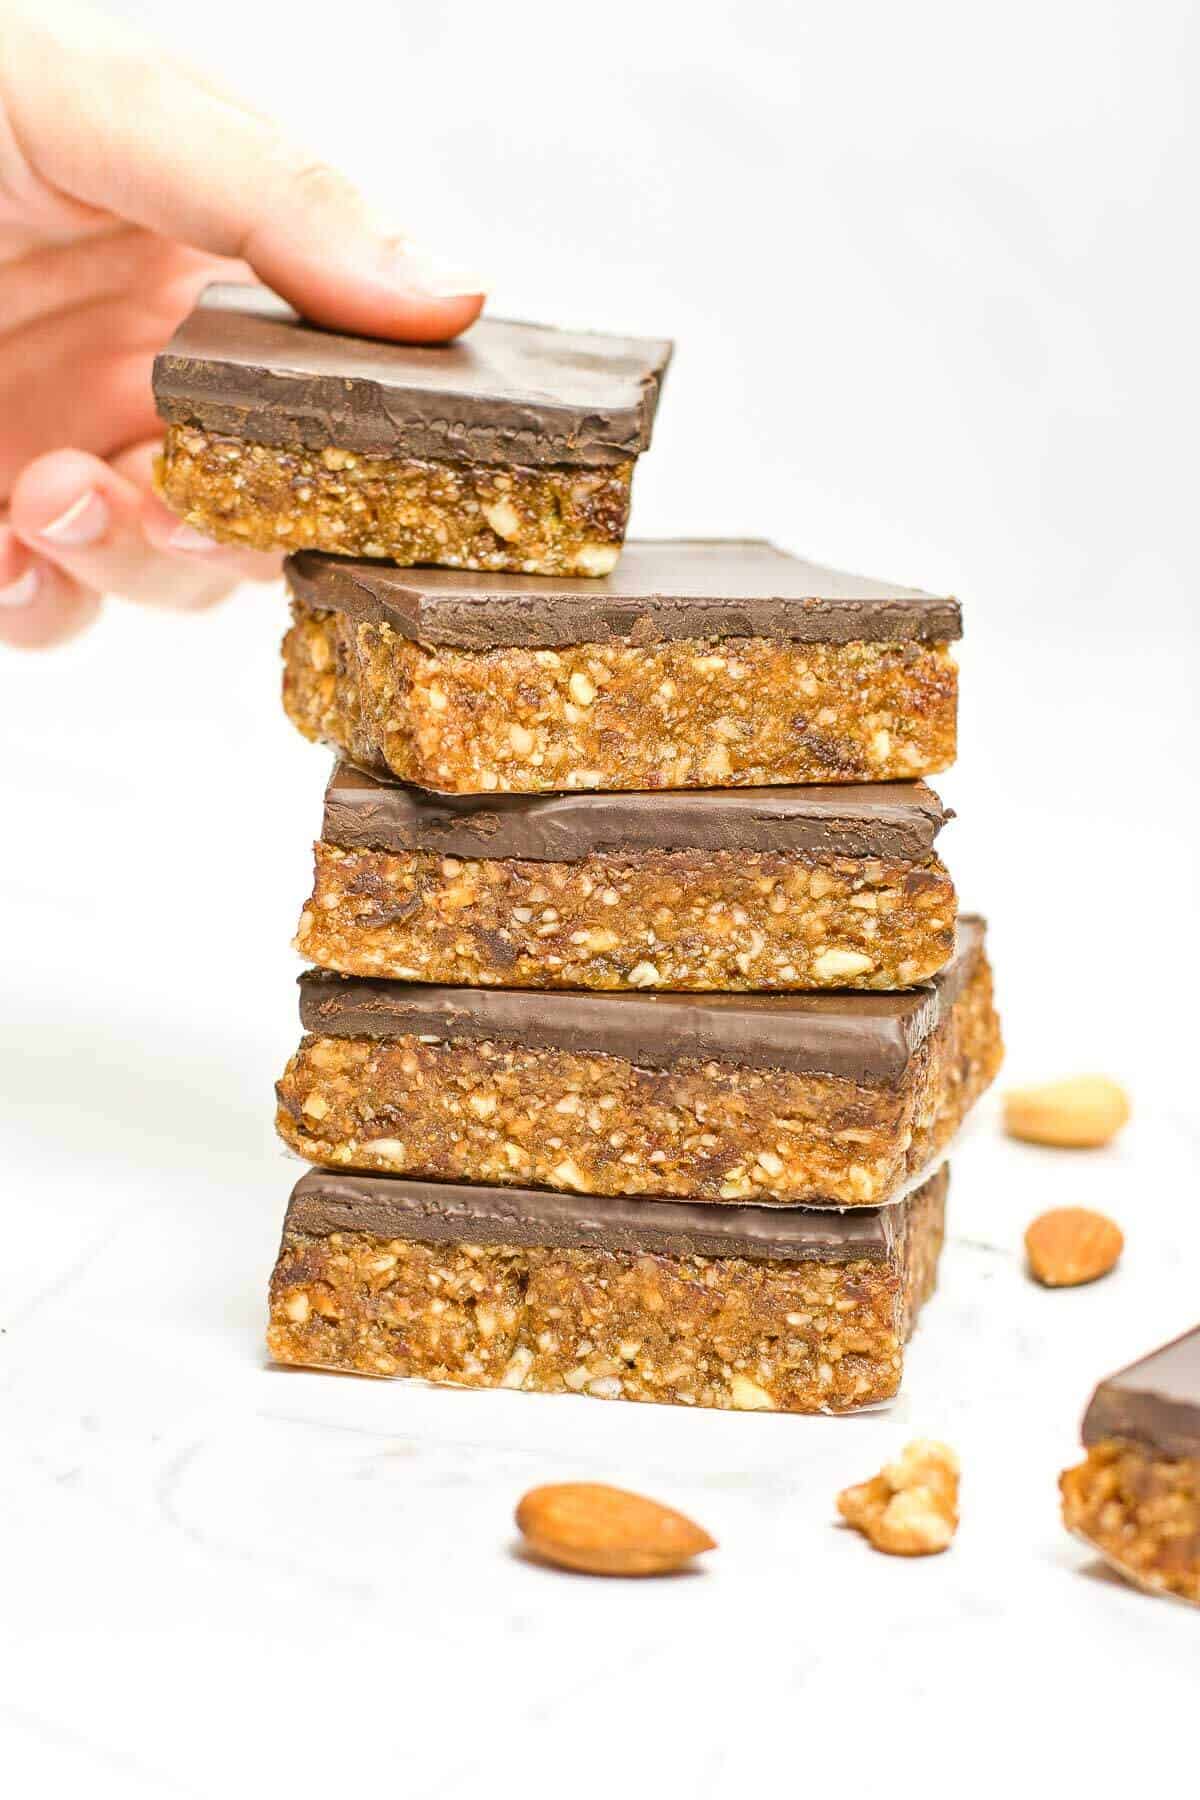 stack of 4 date bars and hand grabbing the top bar